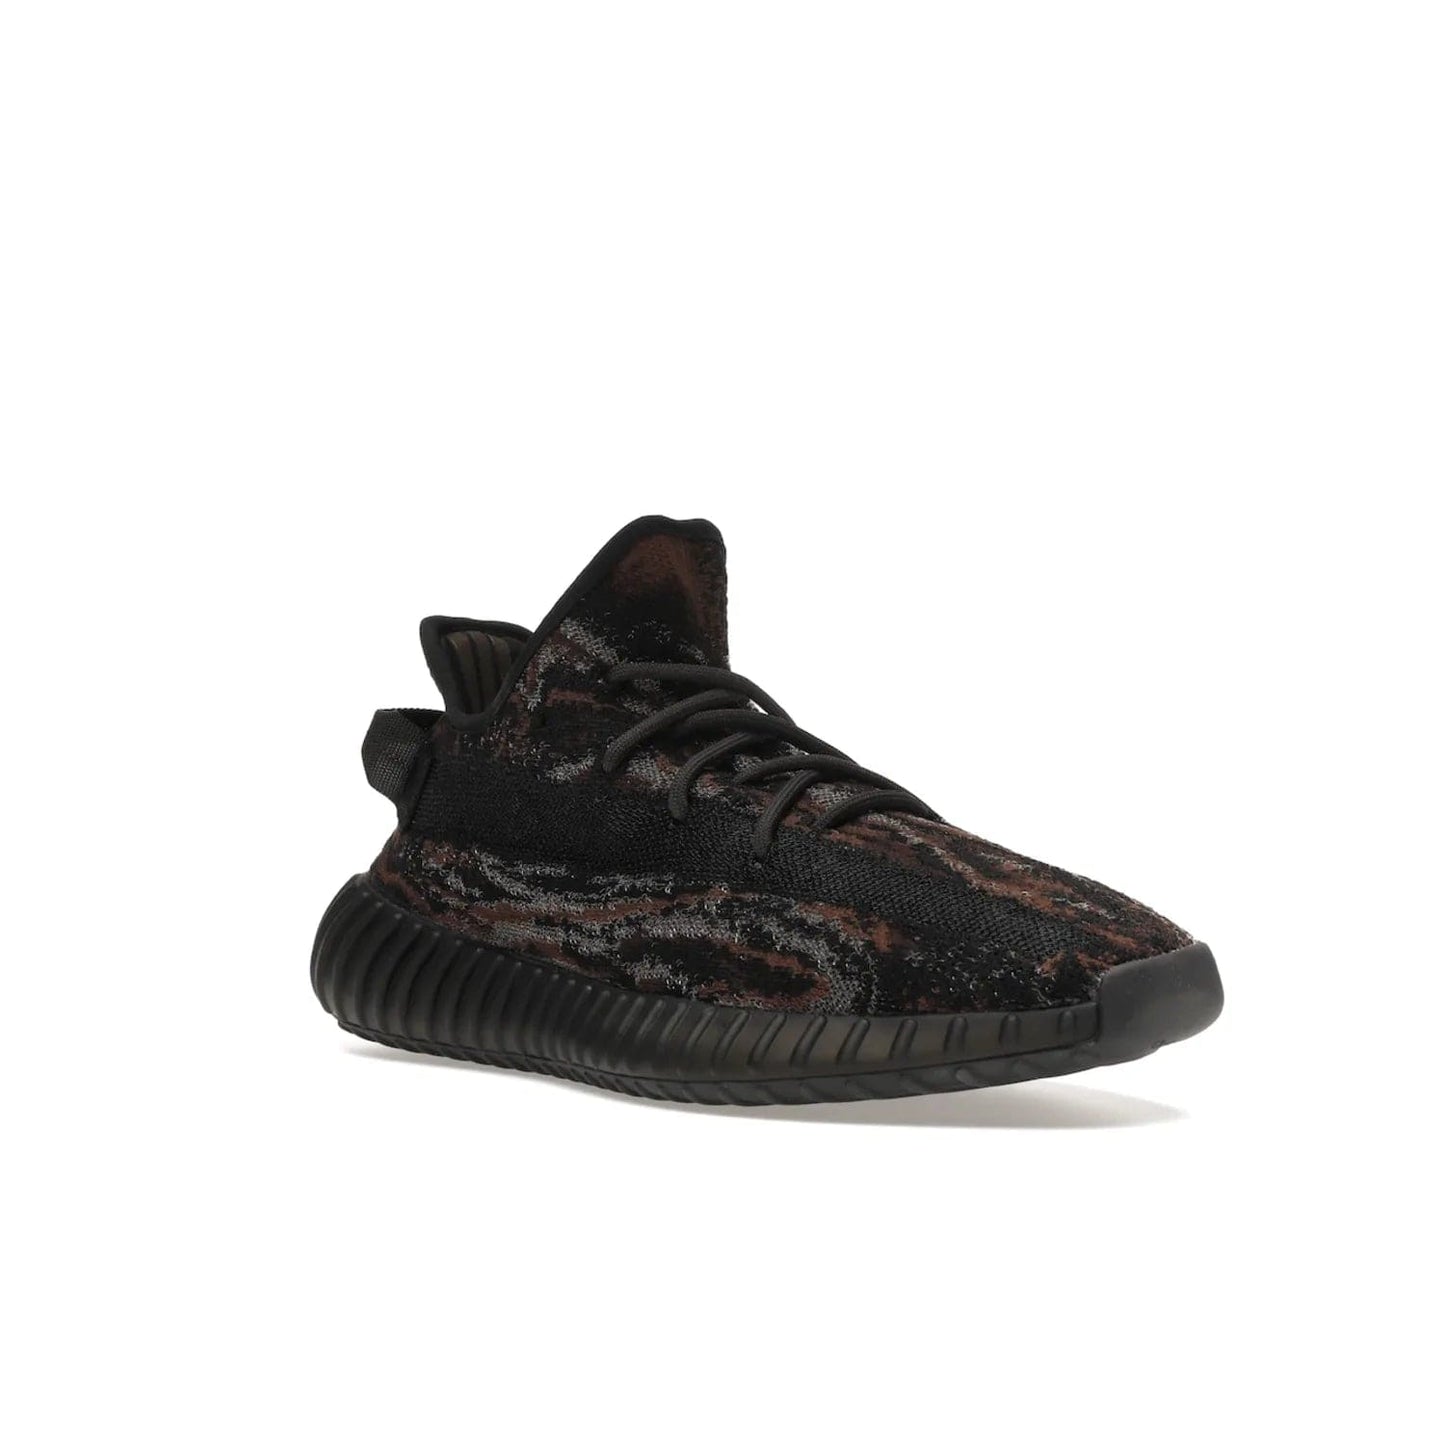 adidas Yeezy Boost 350 V2 MX Rock - Image 6 - Only at www.BallersClubKickz.com - The adidas Yeezy Boost 350 V2 MX Rock features a stylish marbled upper of black, grey, and brown tones. Shop the signature Boost sole, heel tab, and mesh side stripe now, available December of 2021.